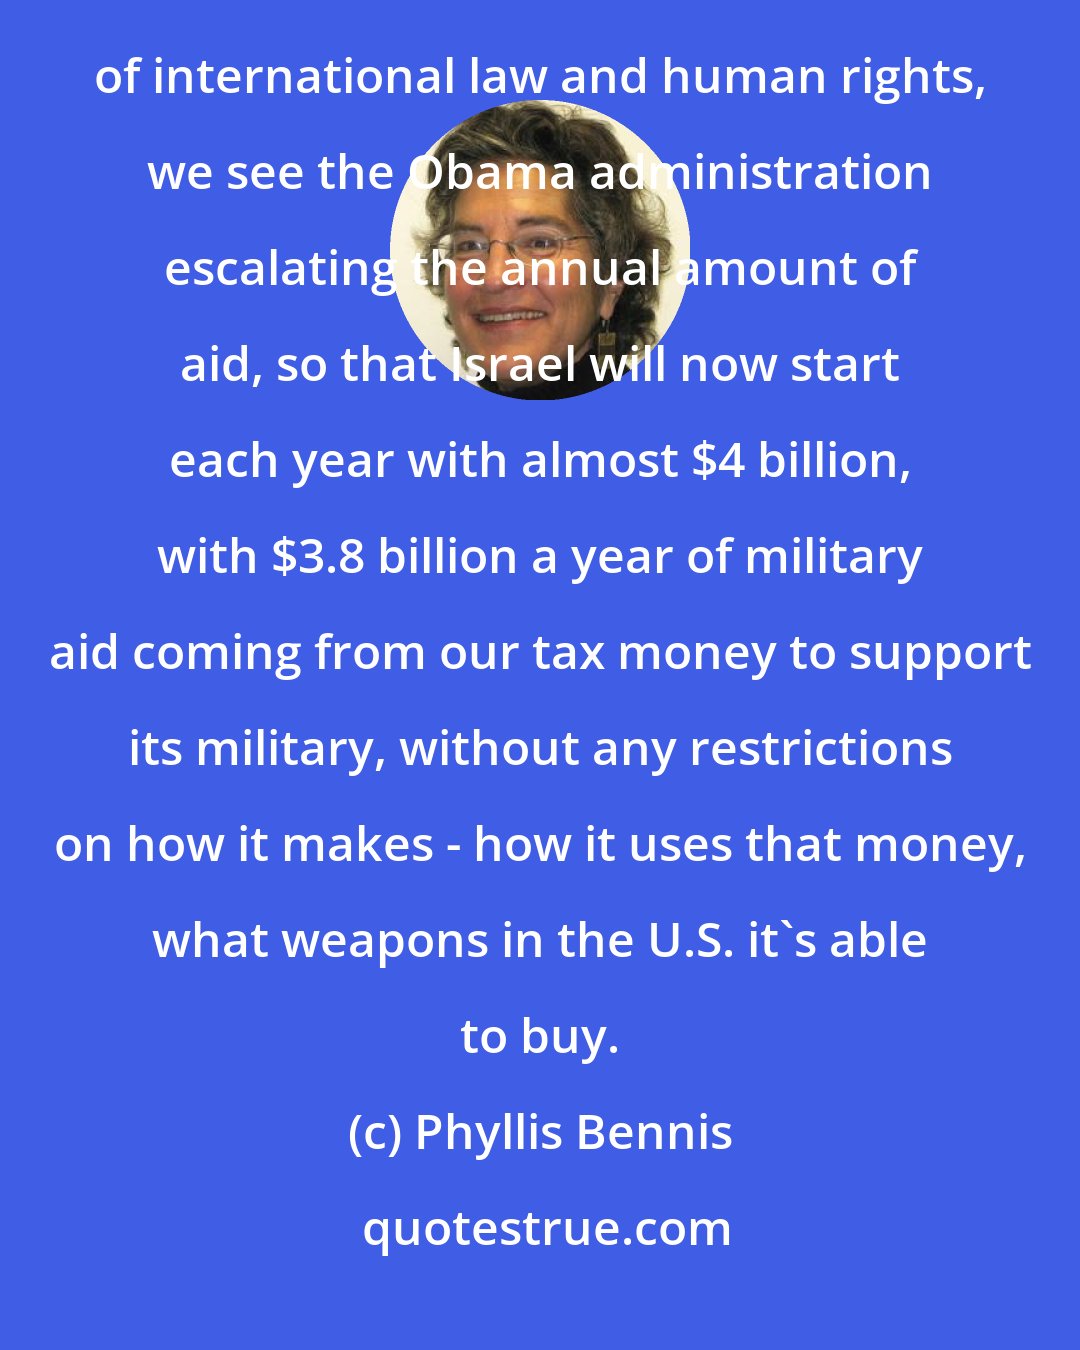 Phyllis Bennis: Instead of ending U.S. military aid to the 23rd wealthiest country to use for its consistent violations of international law and human rights, we see the Obama administration escalating the annual amount of aid, so that Israel will now start each year with almost $4 billion, with $3.8 billion a year of military aid coming from our tax money to support its military, without any restrictions on how it makes - how it uses that money, what weapons in the U.S. it's able to buy.